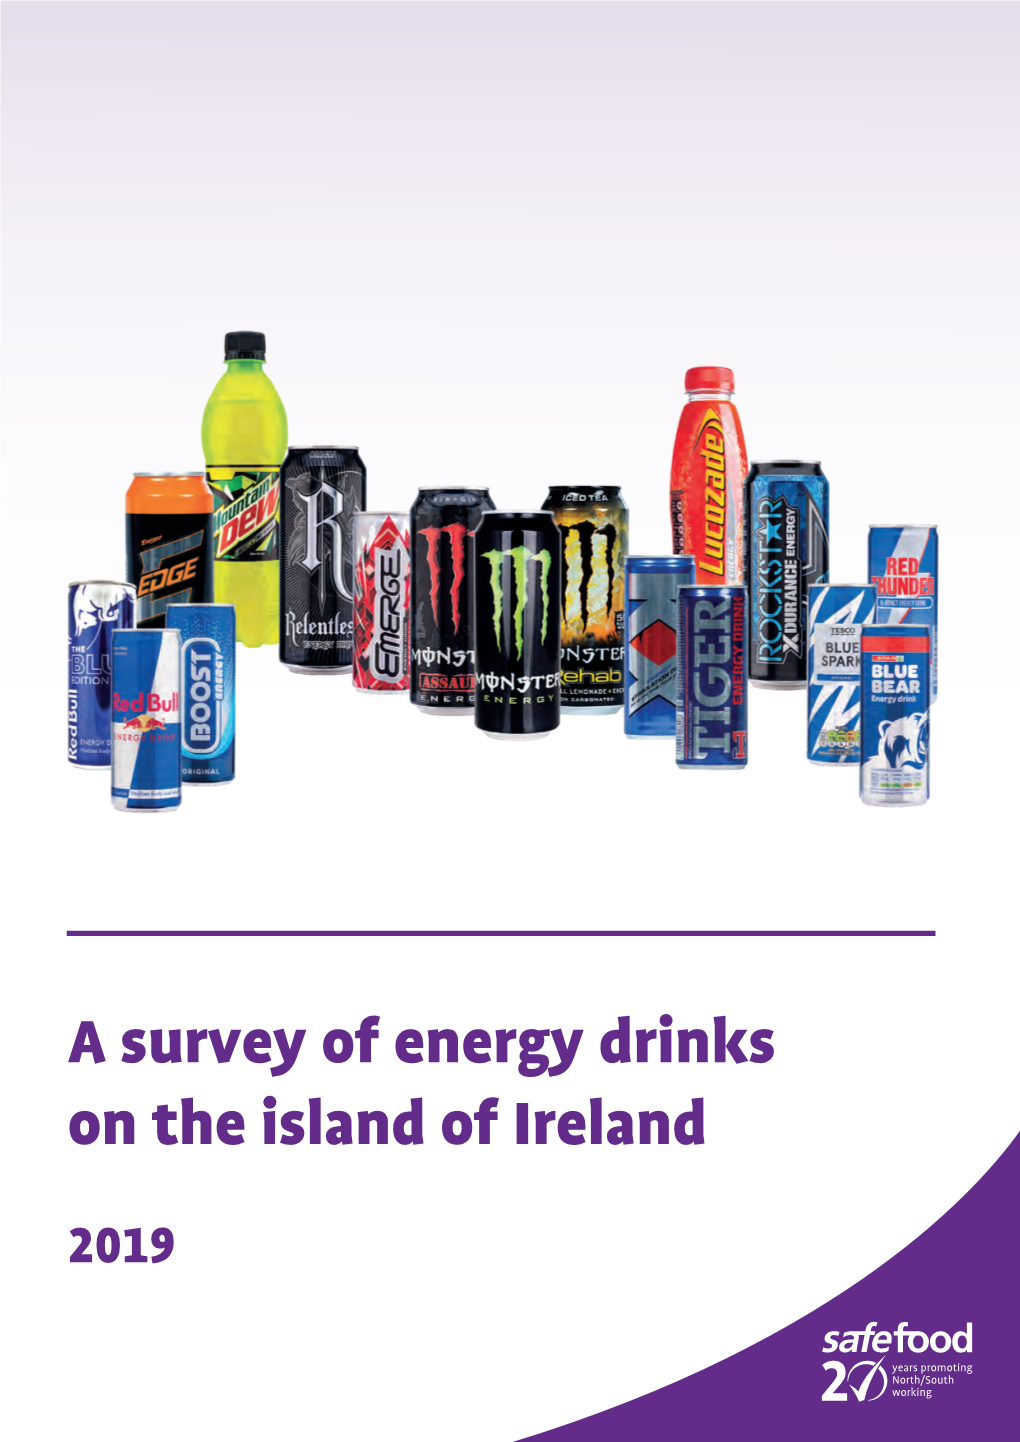 Reports Provides a Snapshot of the Energy Drinks Market Before and After the Implementation of the Sugar Tax